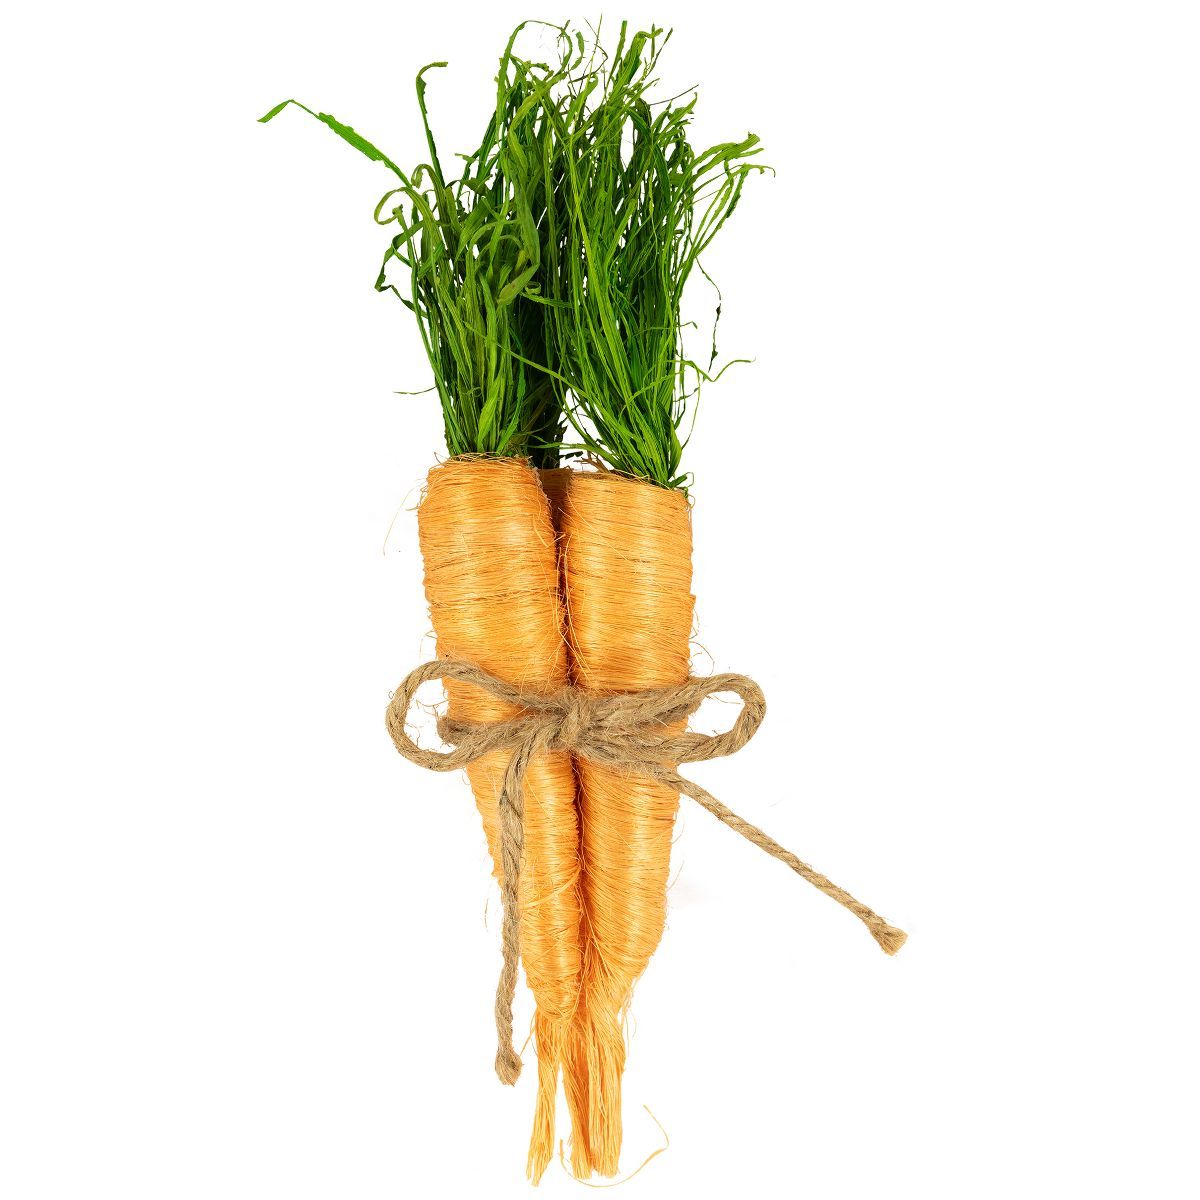 Northlight Straw Carrot Easter Decorations - 9"- Orange and Green - Set of 3 | Target